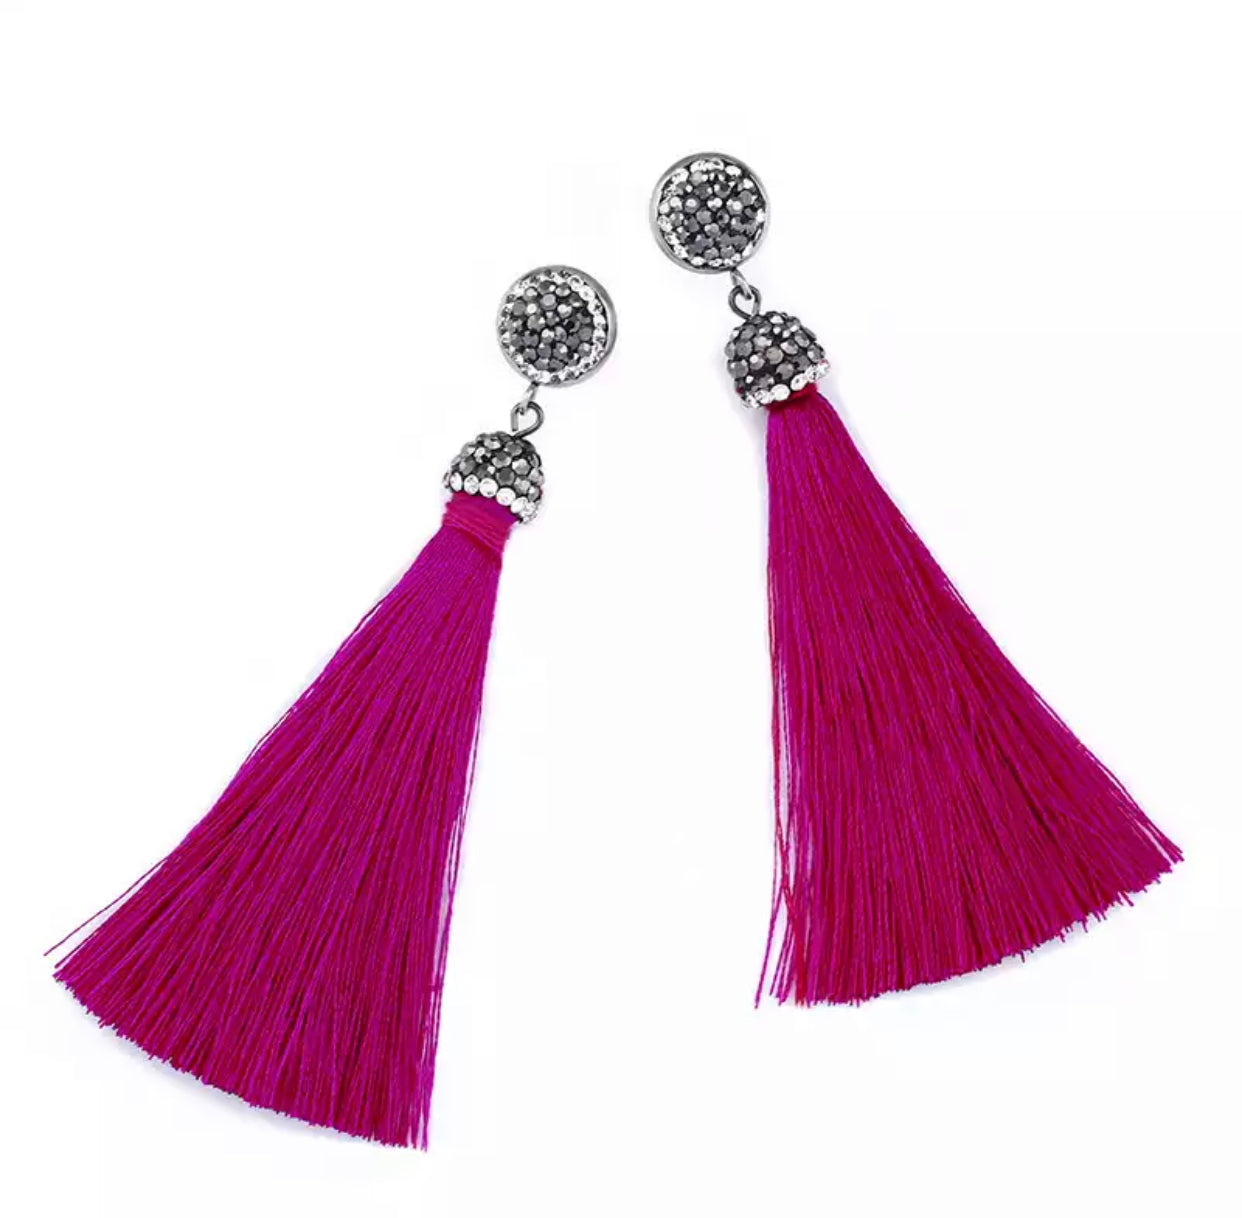  Pave embellished post earrings with hot pink silk tassel